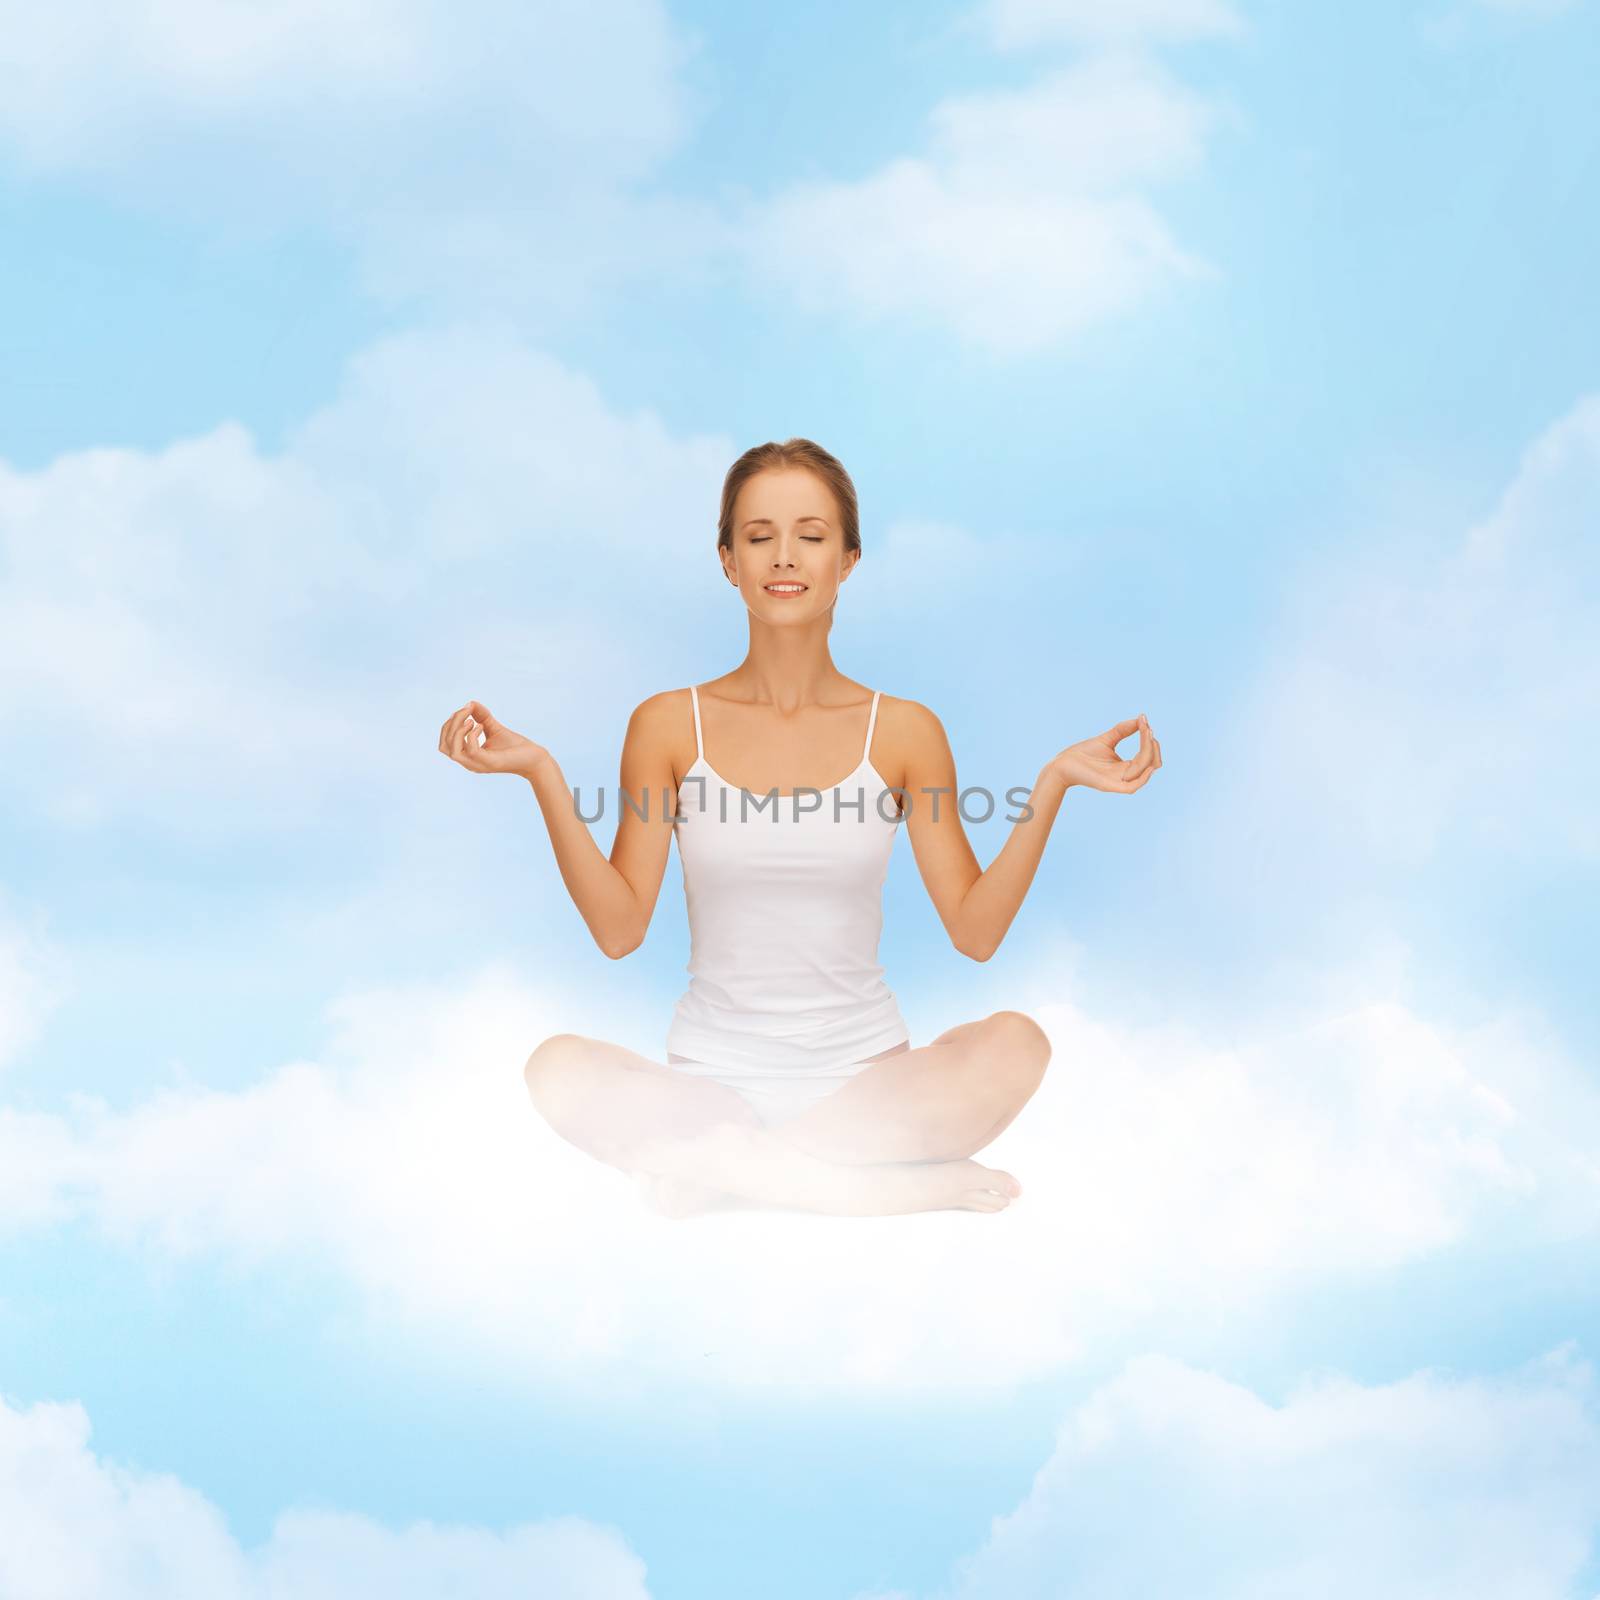 relaxation, meditation and lifestyle concept - girl on the cloud in lotus position and meditating